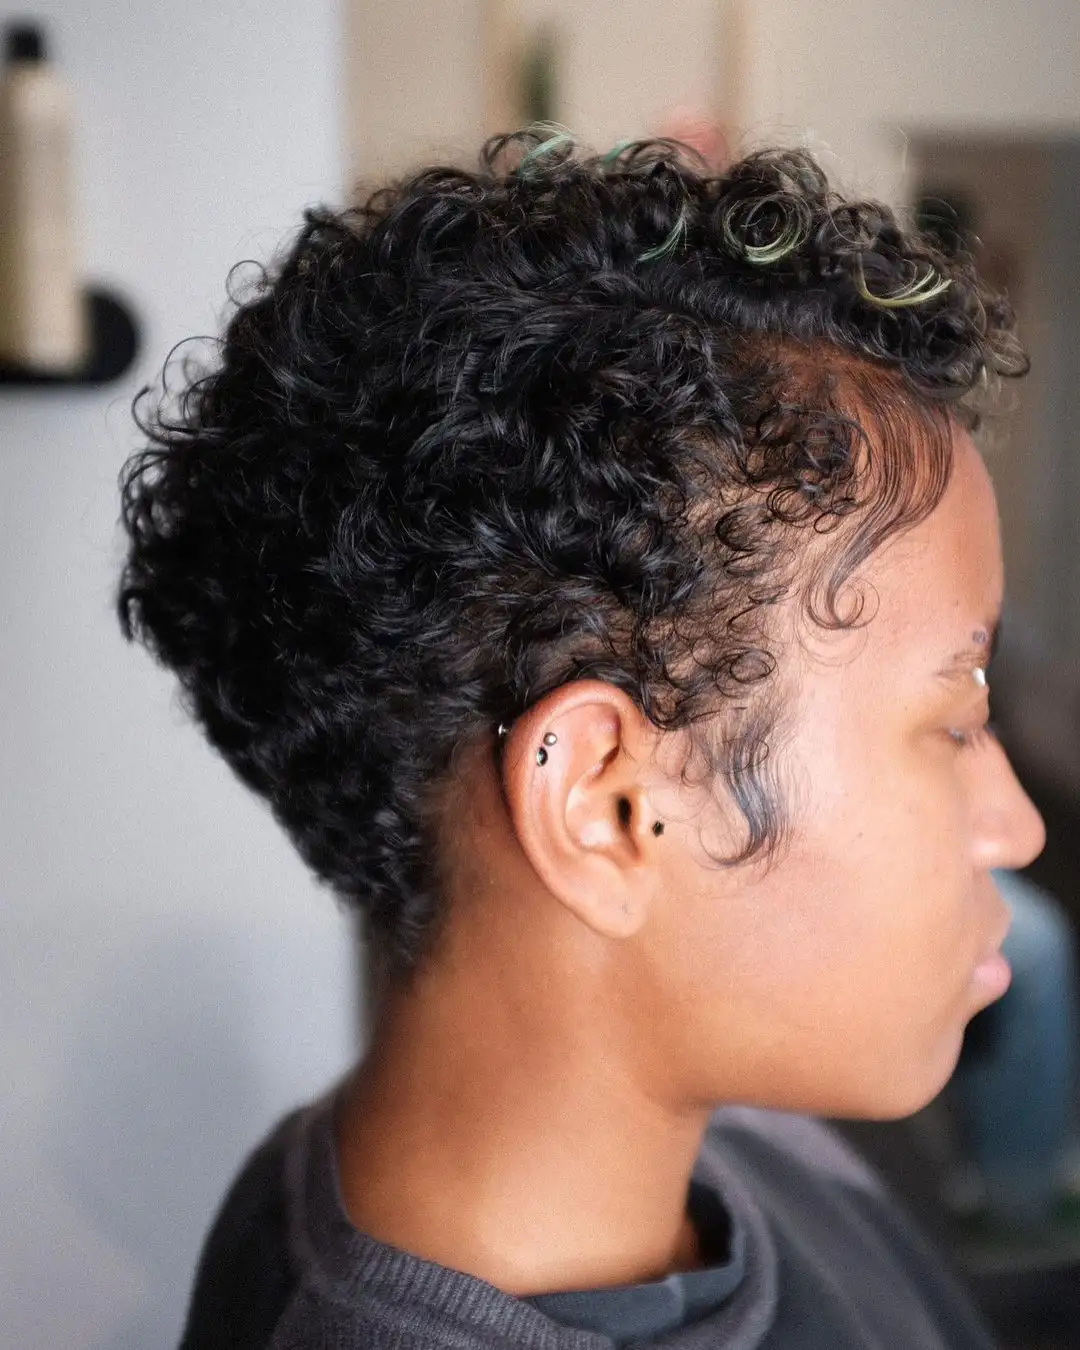 Black Woman with Short Curly Hairstyle